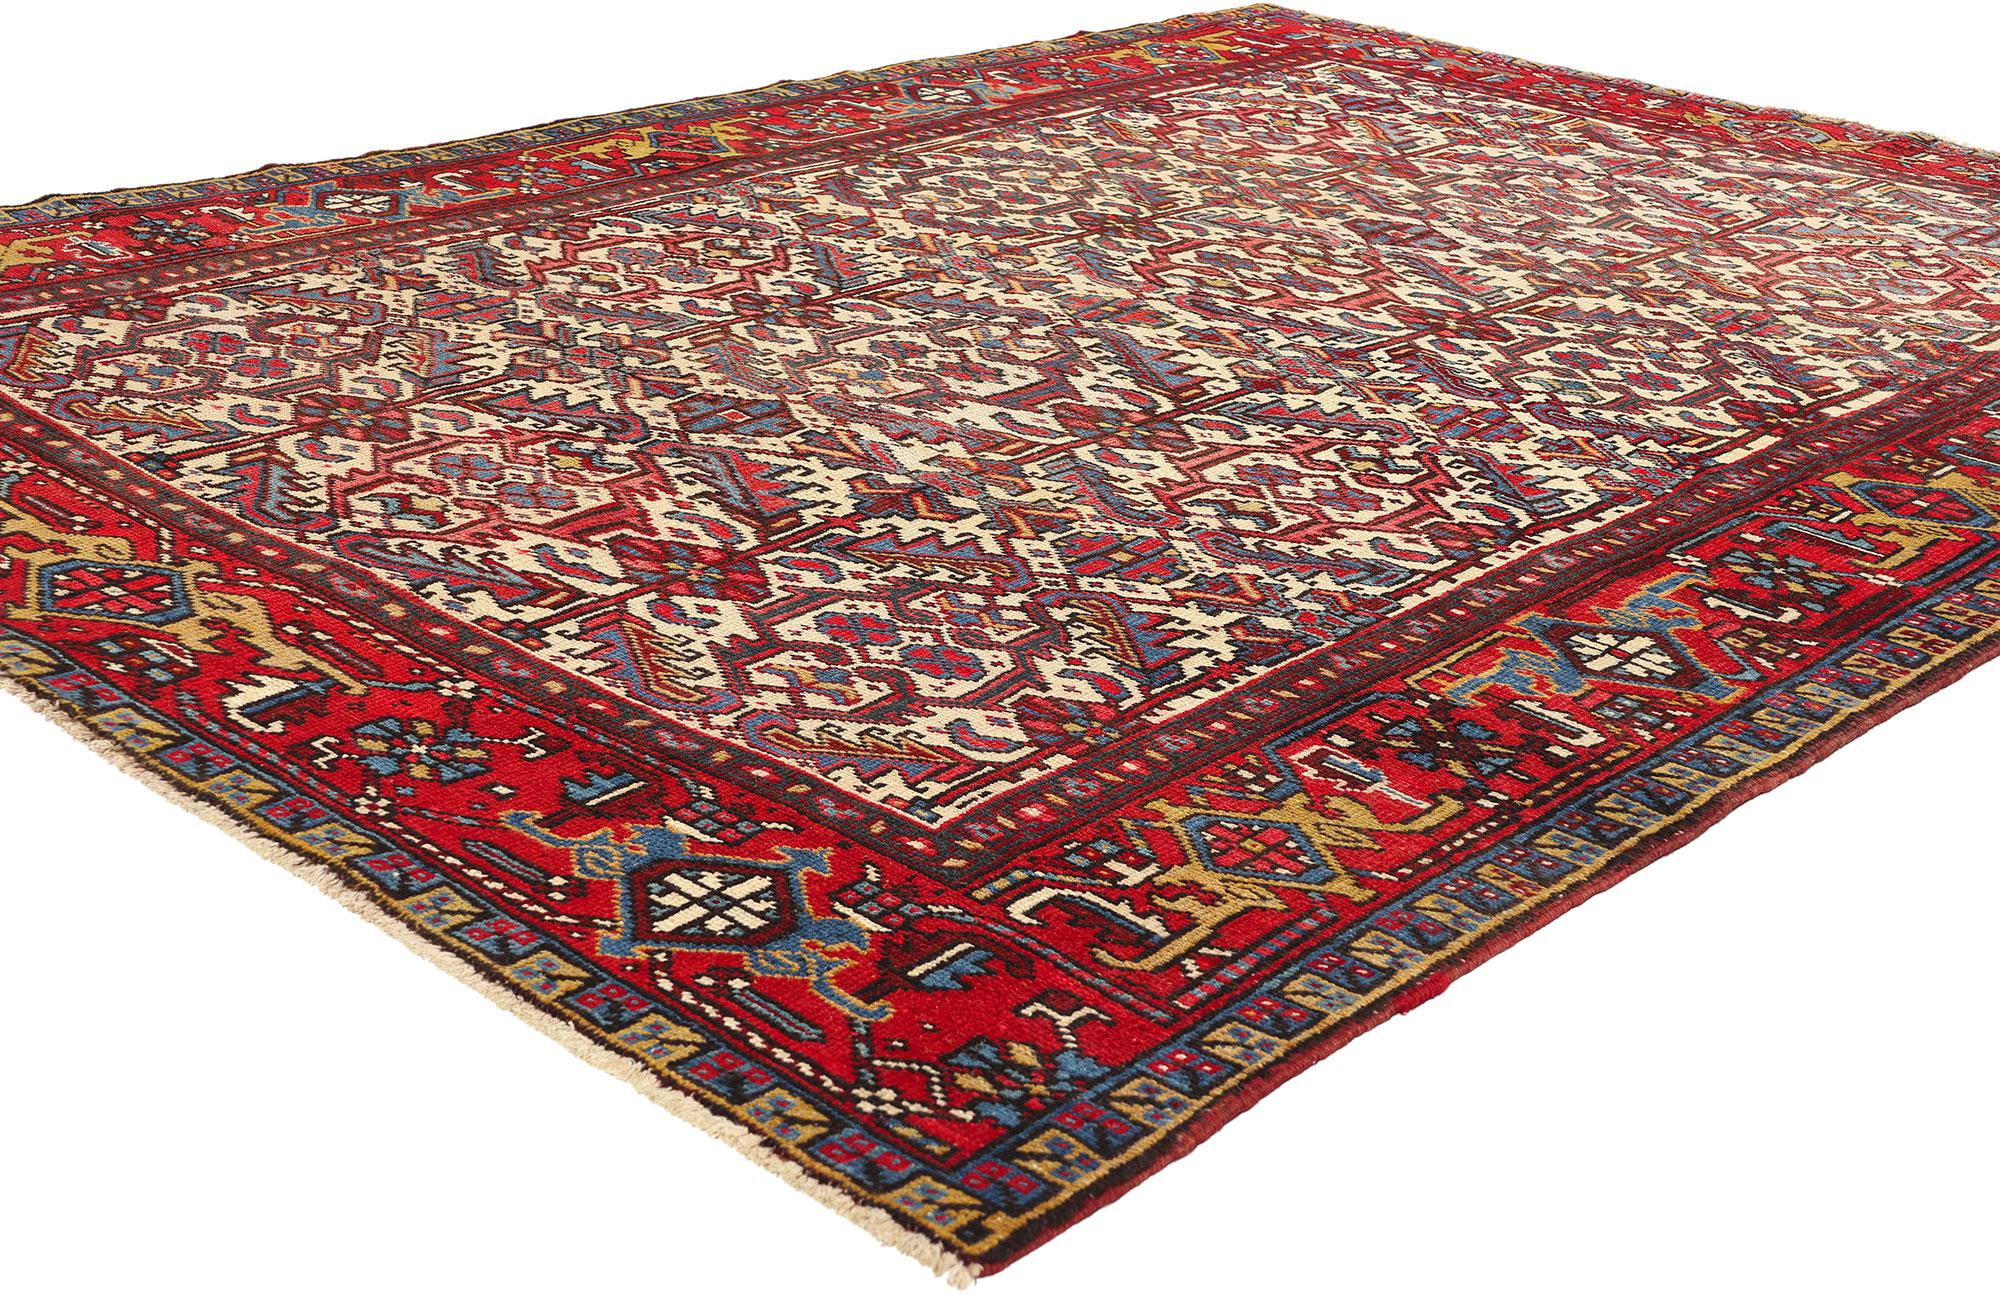 78768 Antique Ivory Persian Dragon Serapi Heriz Rug, 06'08 x 09'01. Antique Persian Dragon Serapi Heriz rugs, originating from the Heriz region in Northwest Iran, are renowned for their durability, bold geometric patterns, and vibrant colors, making